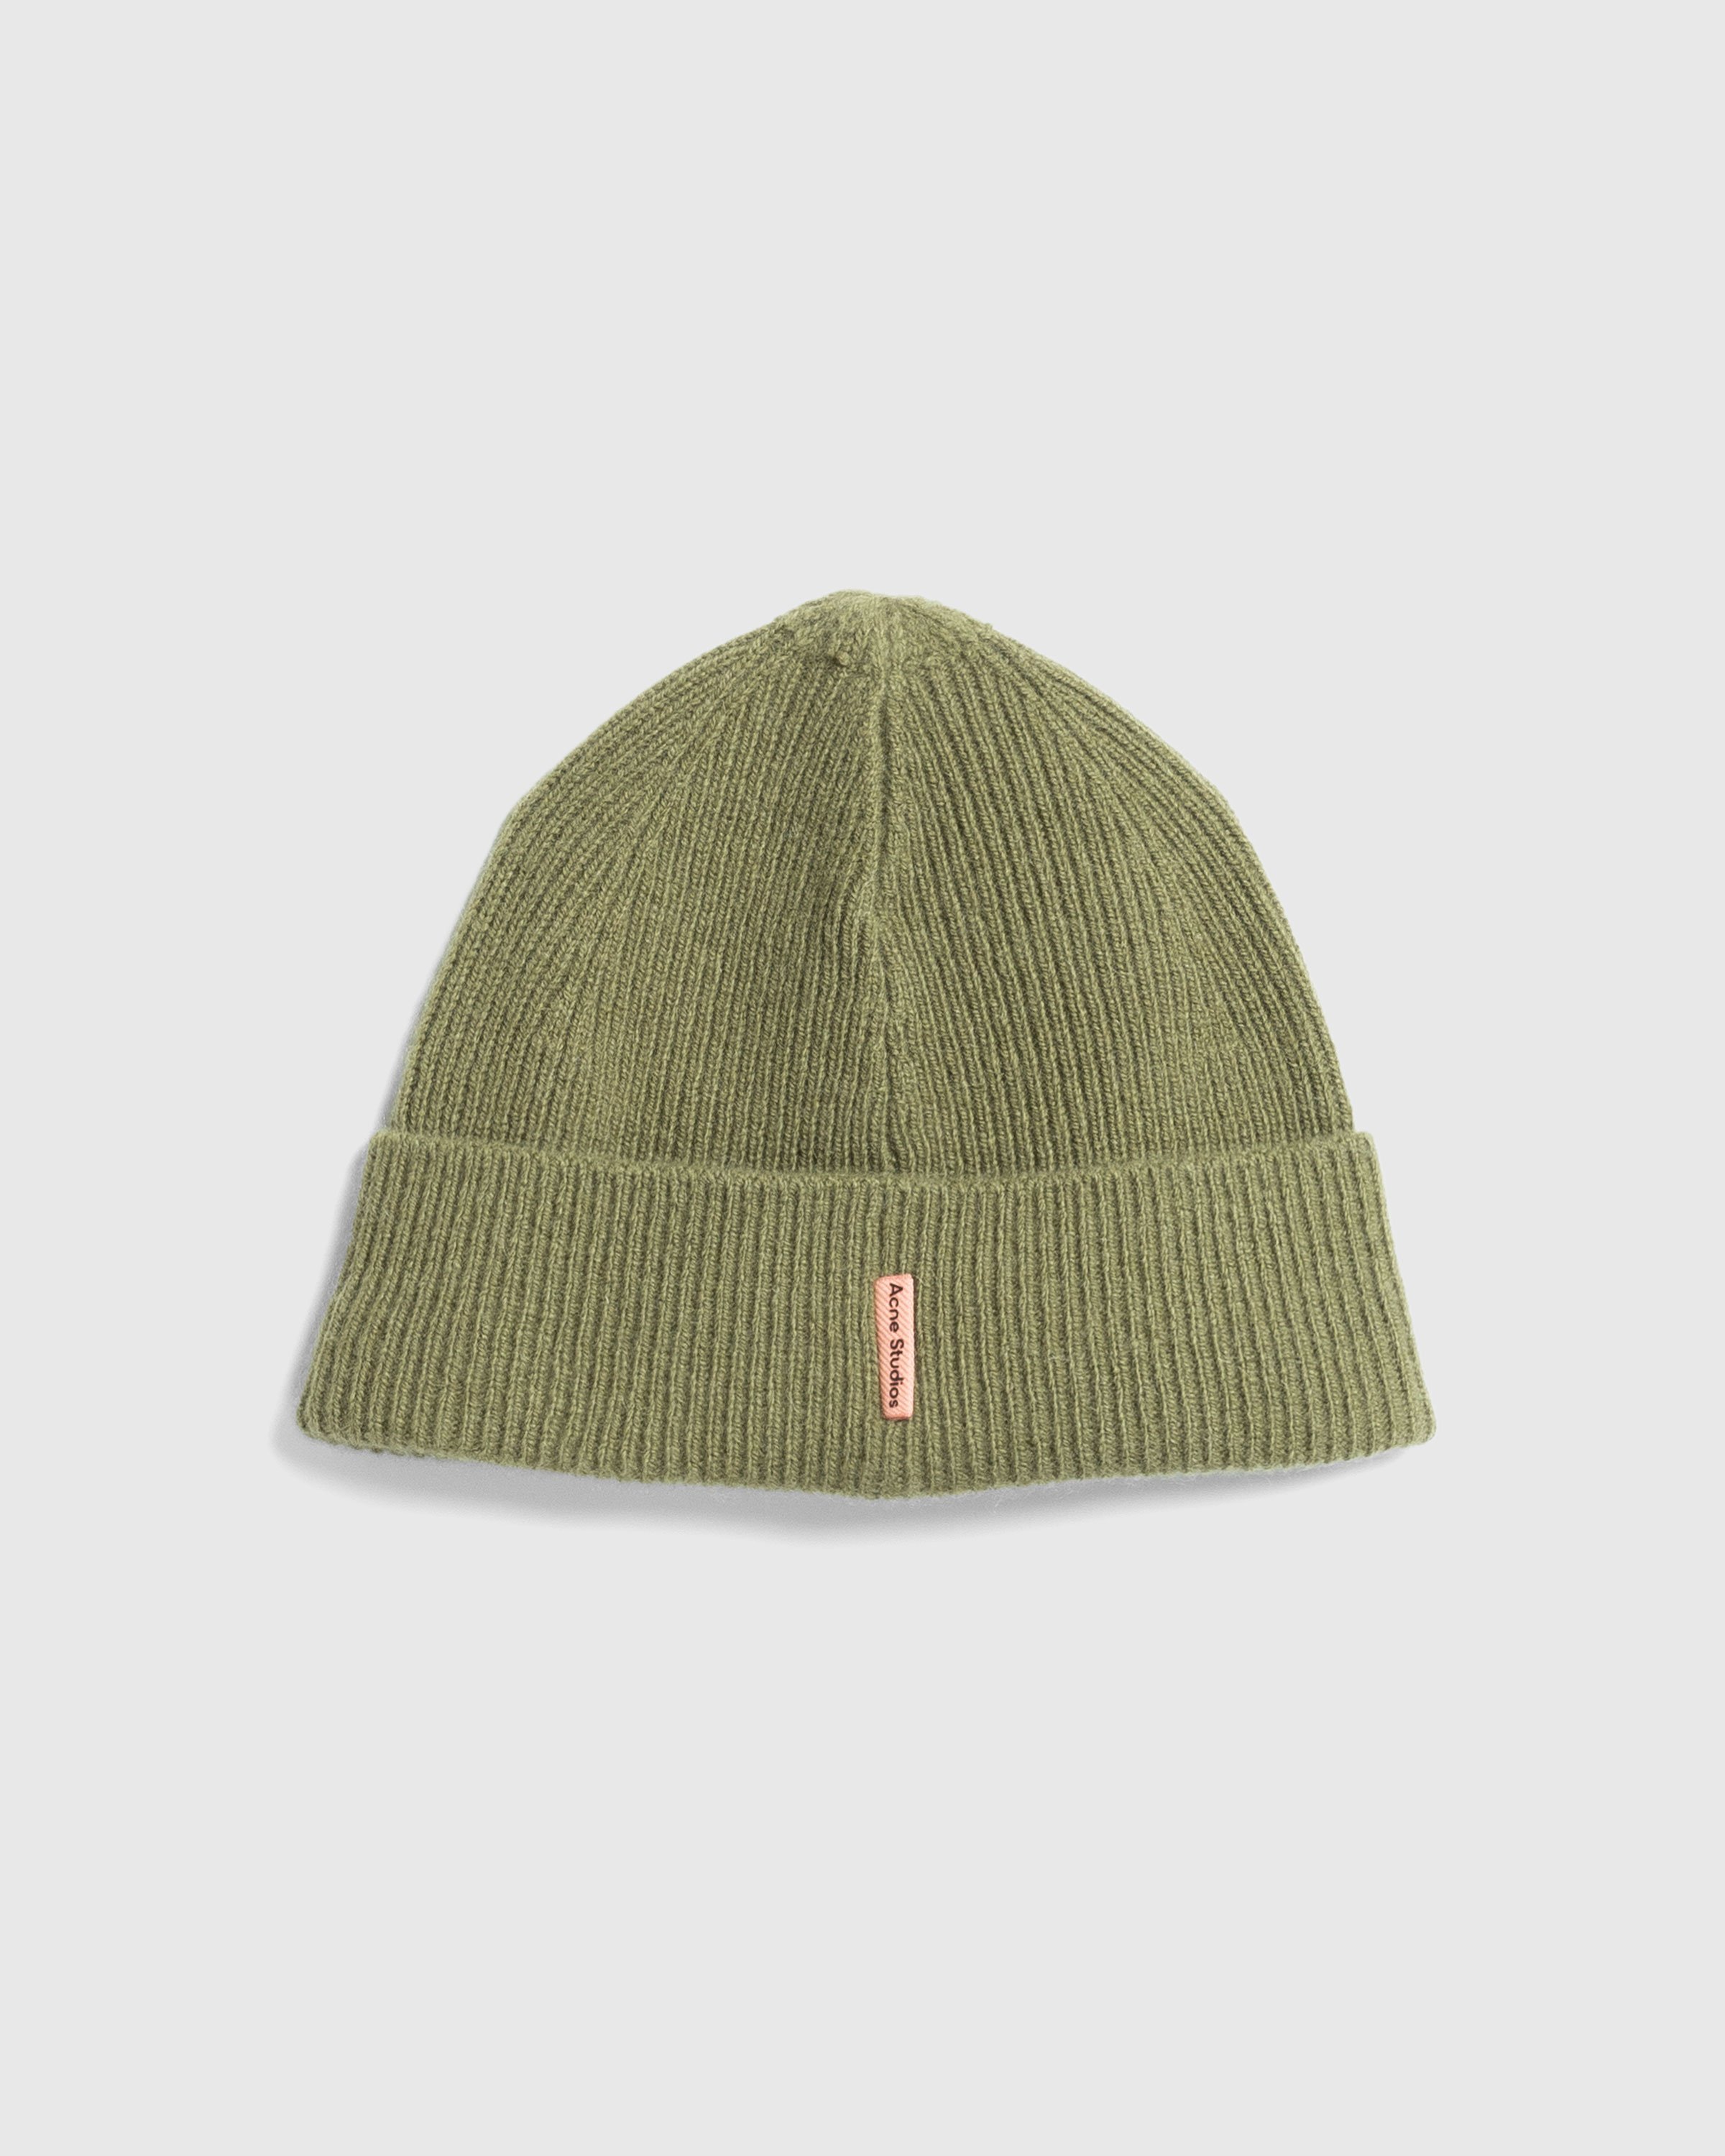 Acne Studios - FN-UX-HATS000187 Olive Green - Accessories - Green - Image 2